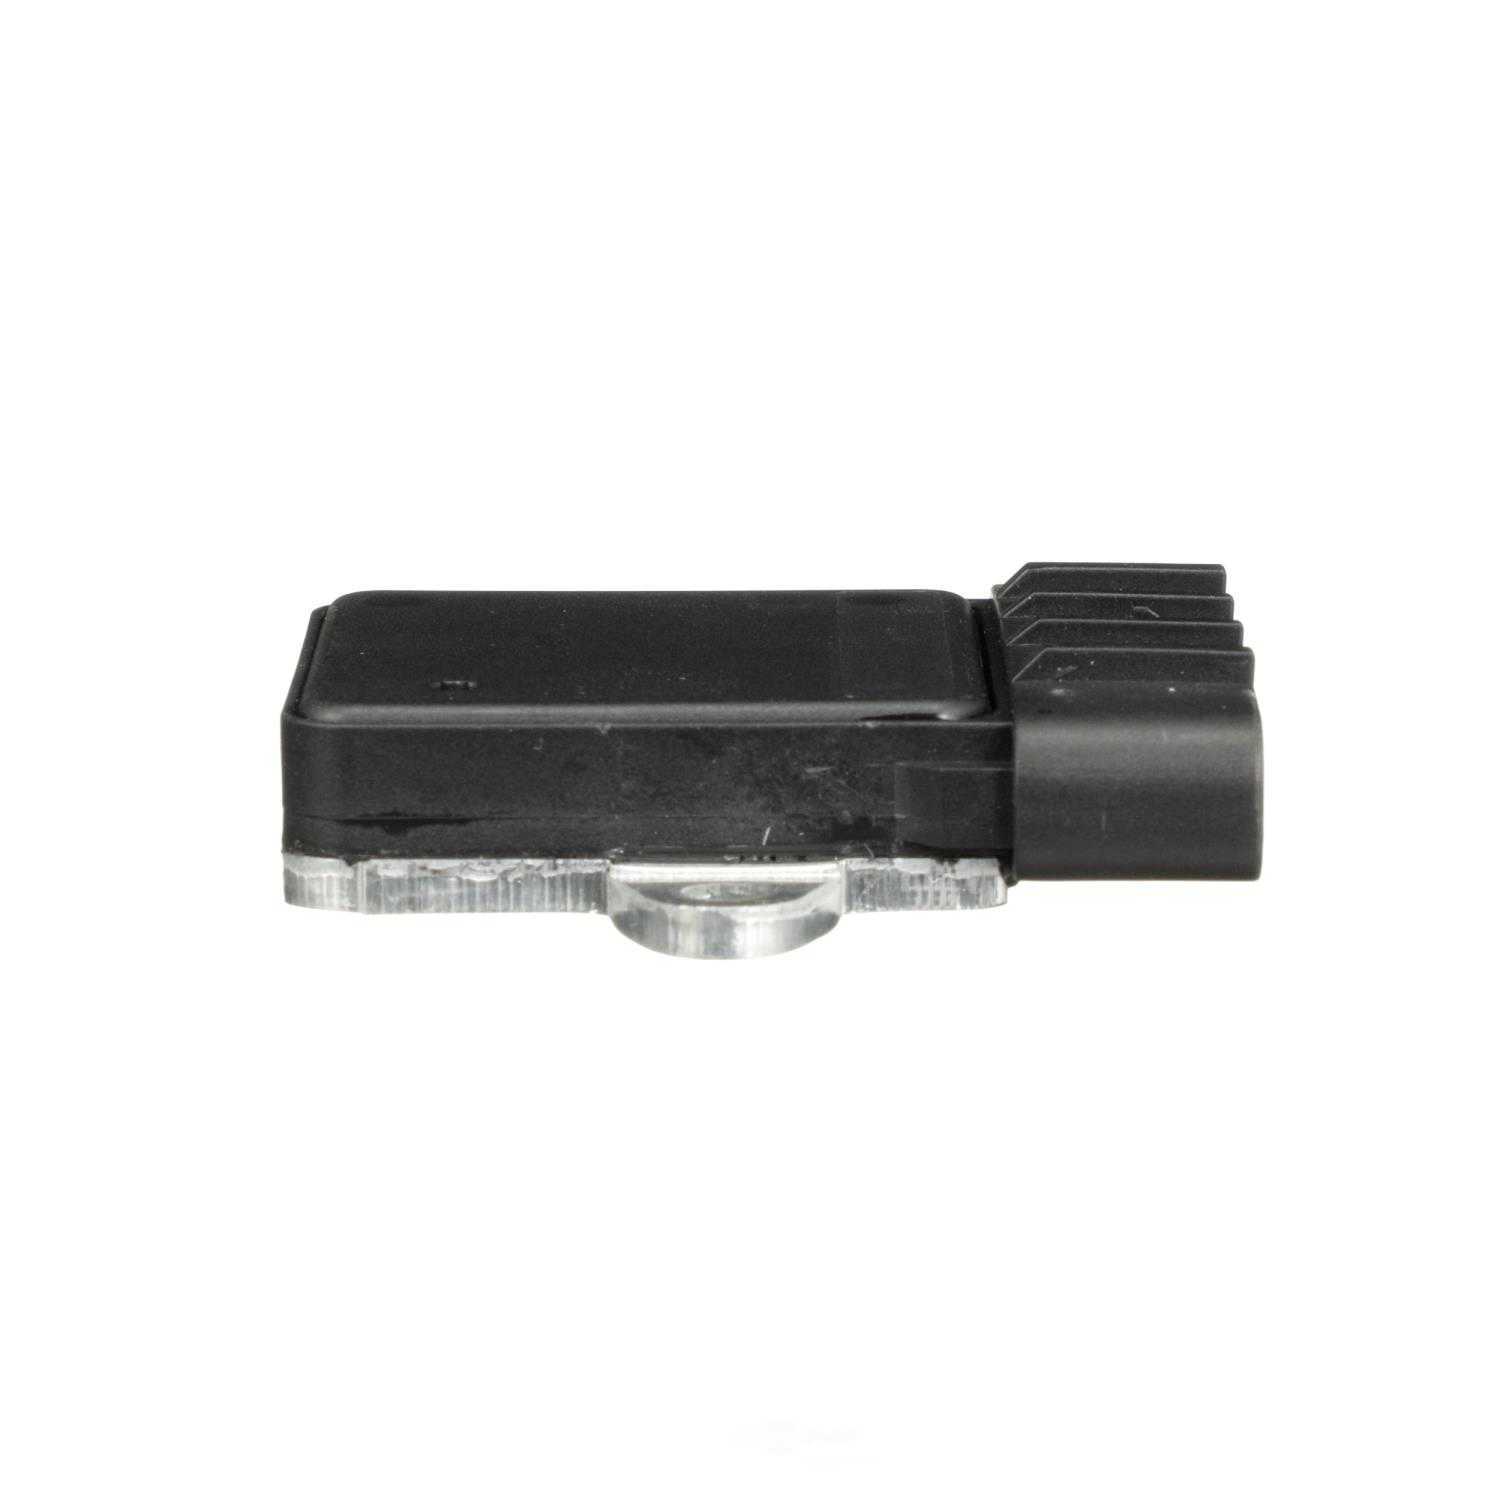 STANDARD MOTOR PRODUCTS - Ignition Control Module - STA LX-780